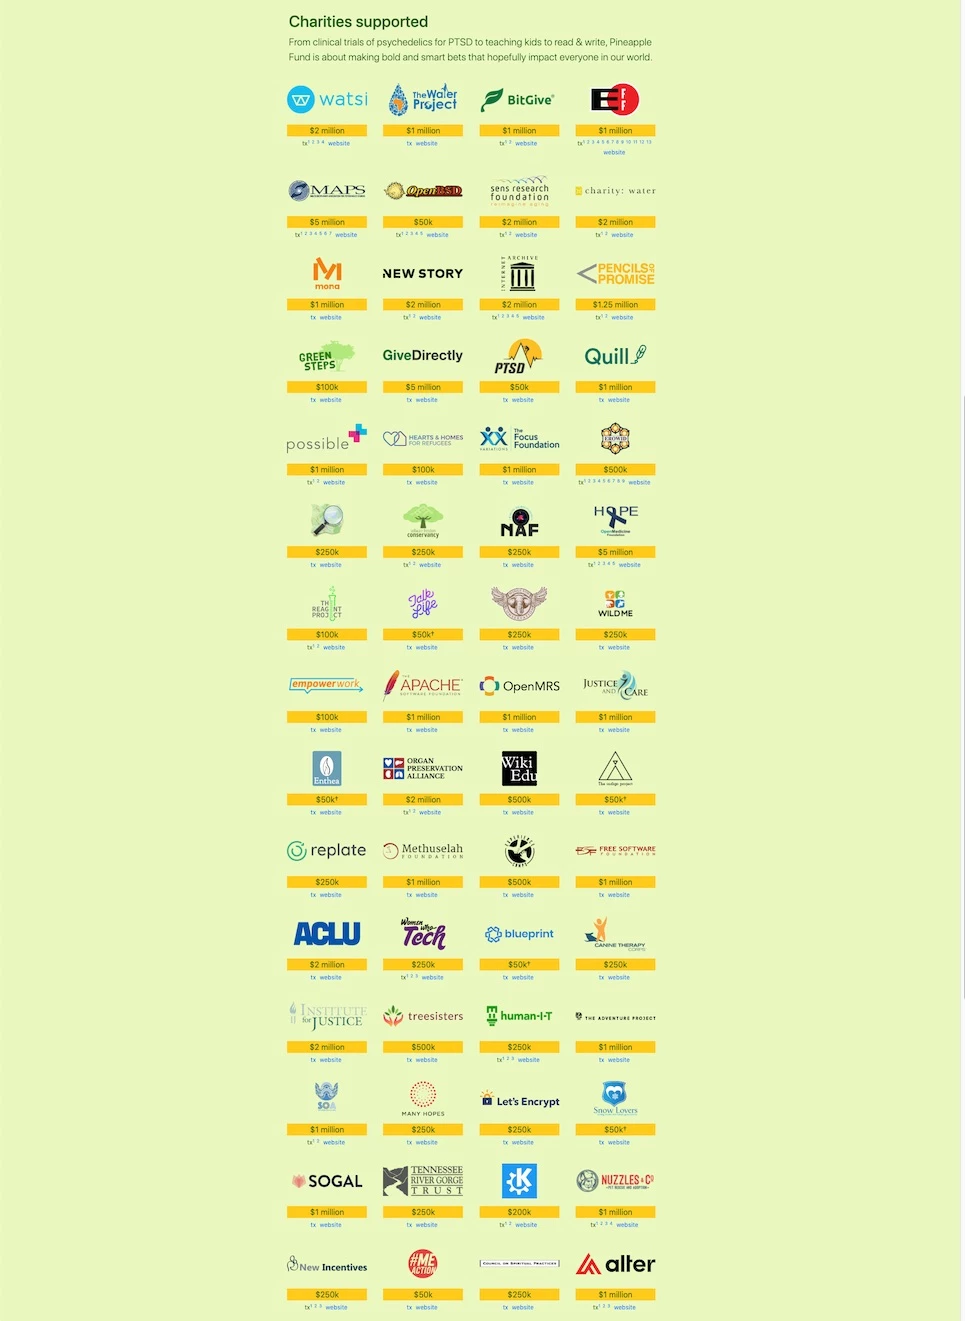 The 55 organizations that the Pineapple Fund donated to